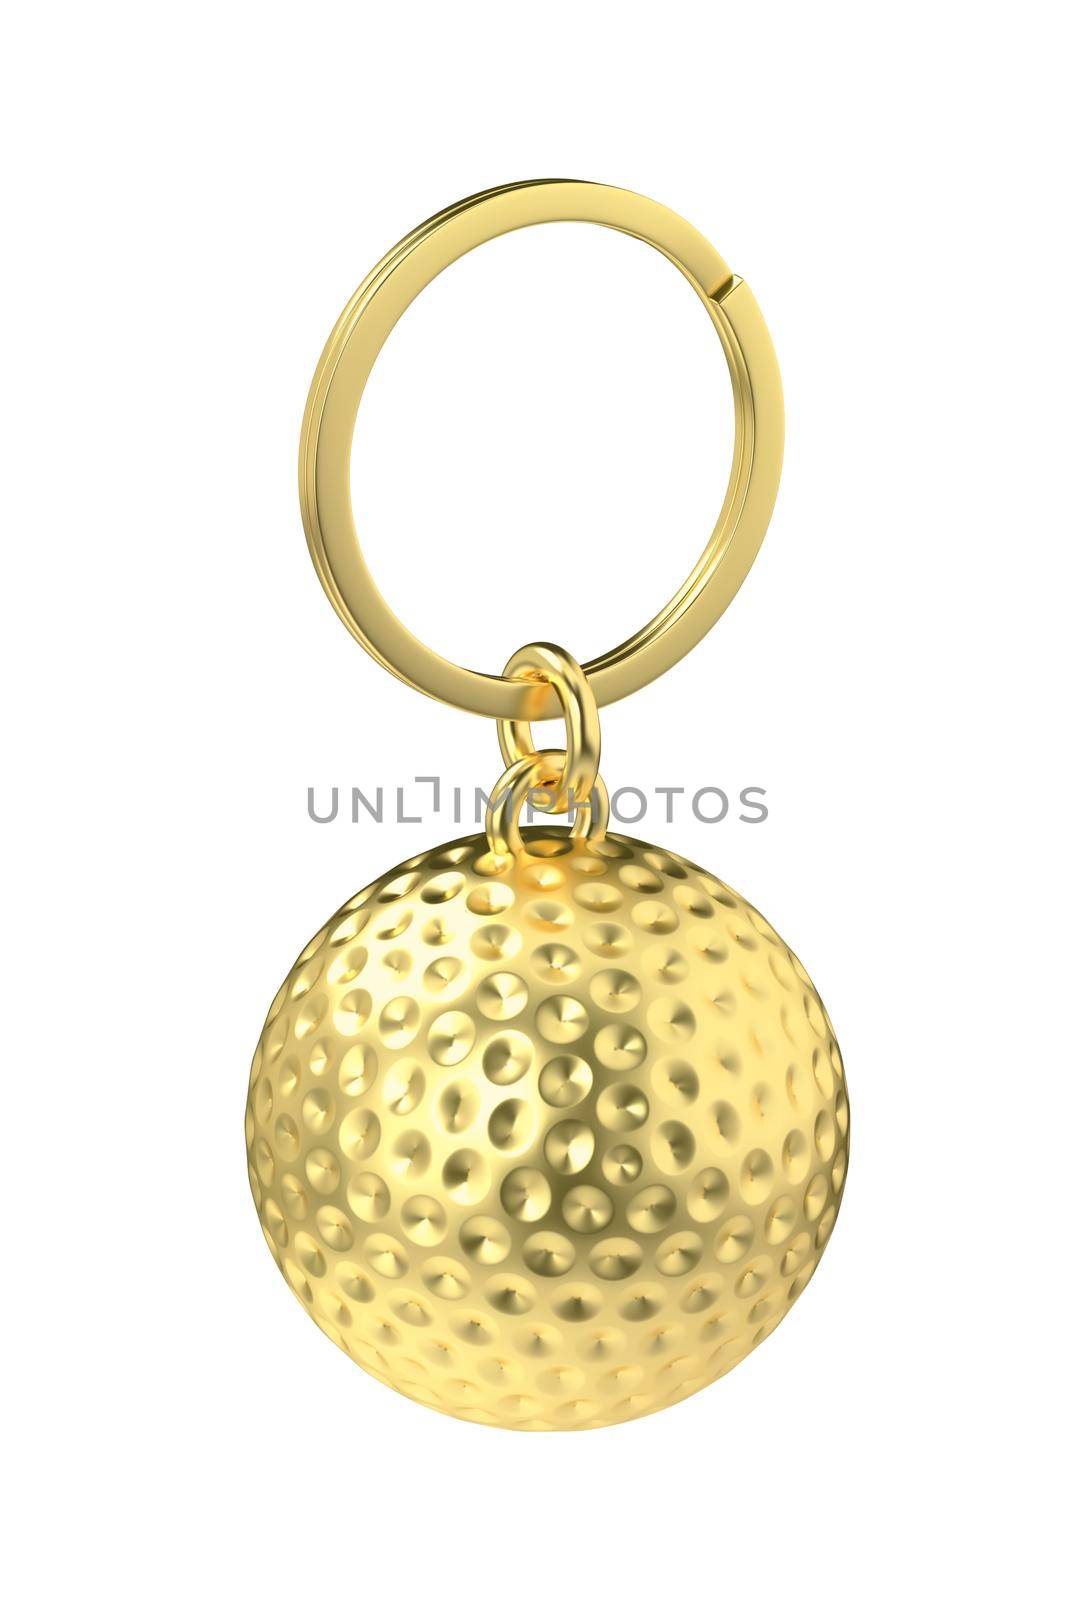 Gold keychain with golf ball by magraphics